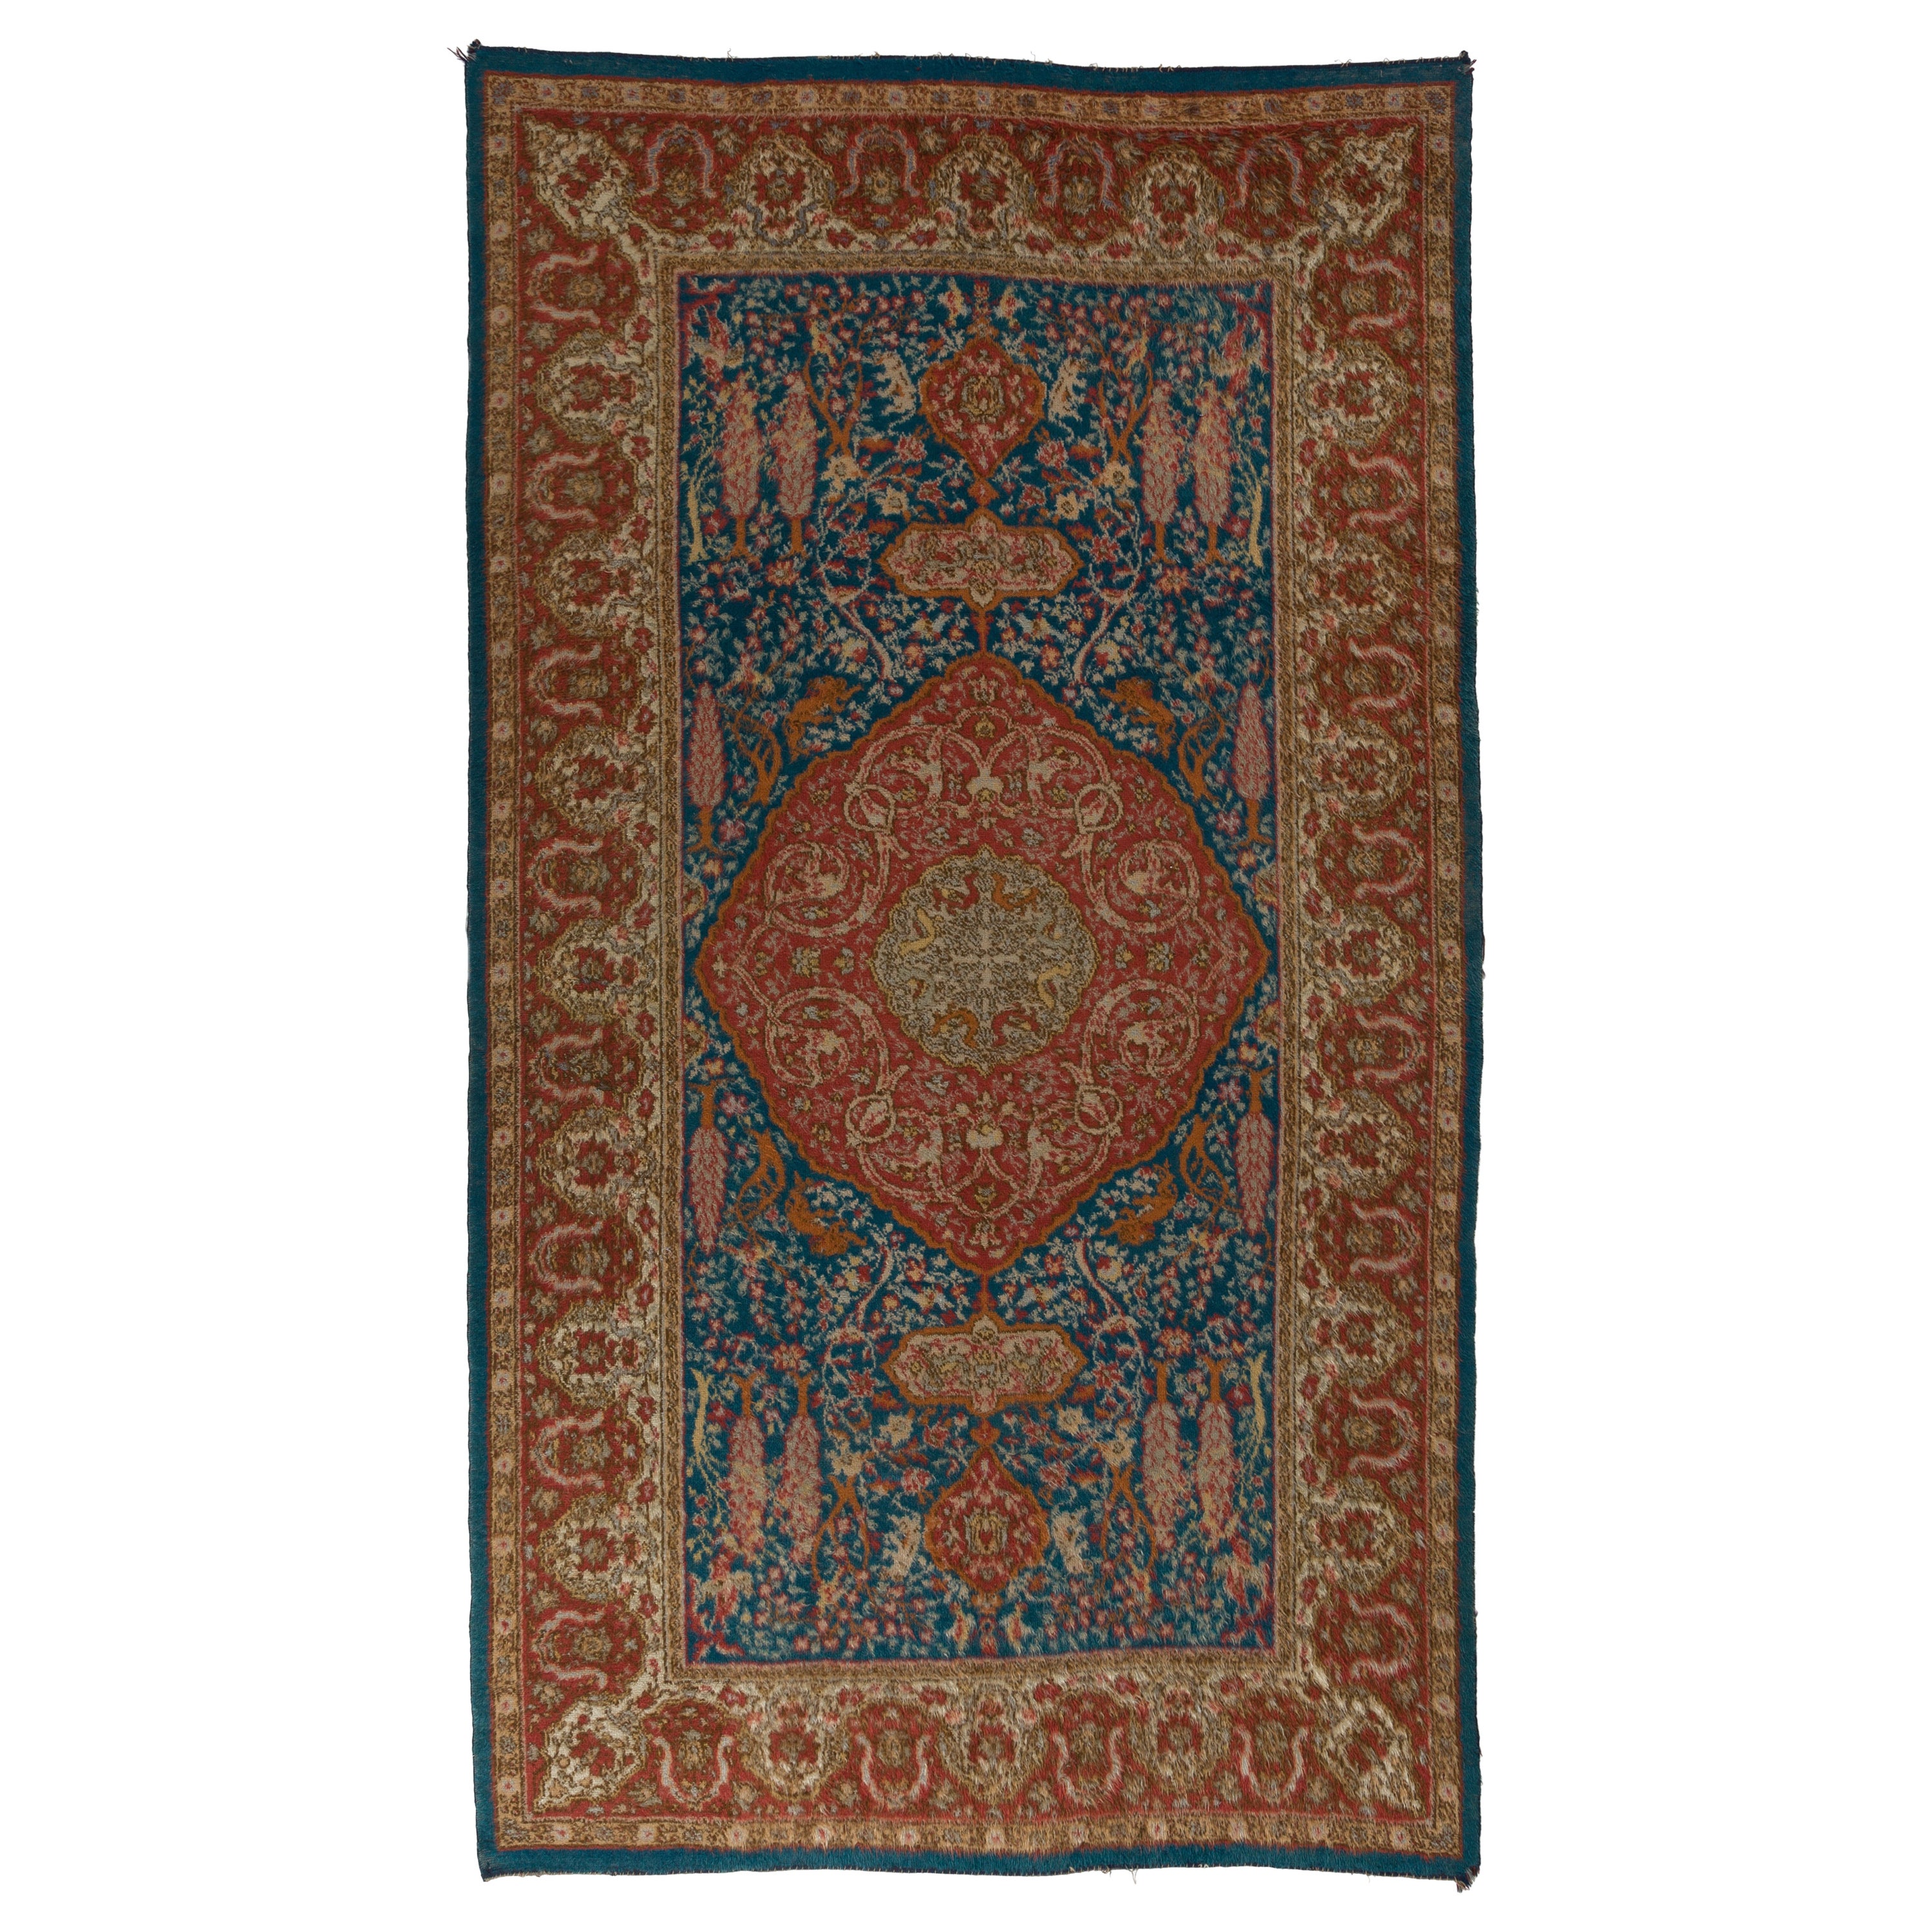 A truly outstanding and one of a kind antique Turkish Oushak rug made of local Angora (mohair) wool that created a silky texture.
What makes this rug so special is the weaving technique used in making it which created the same design and pile height